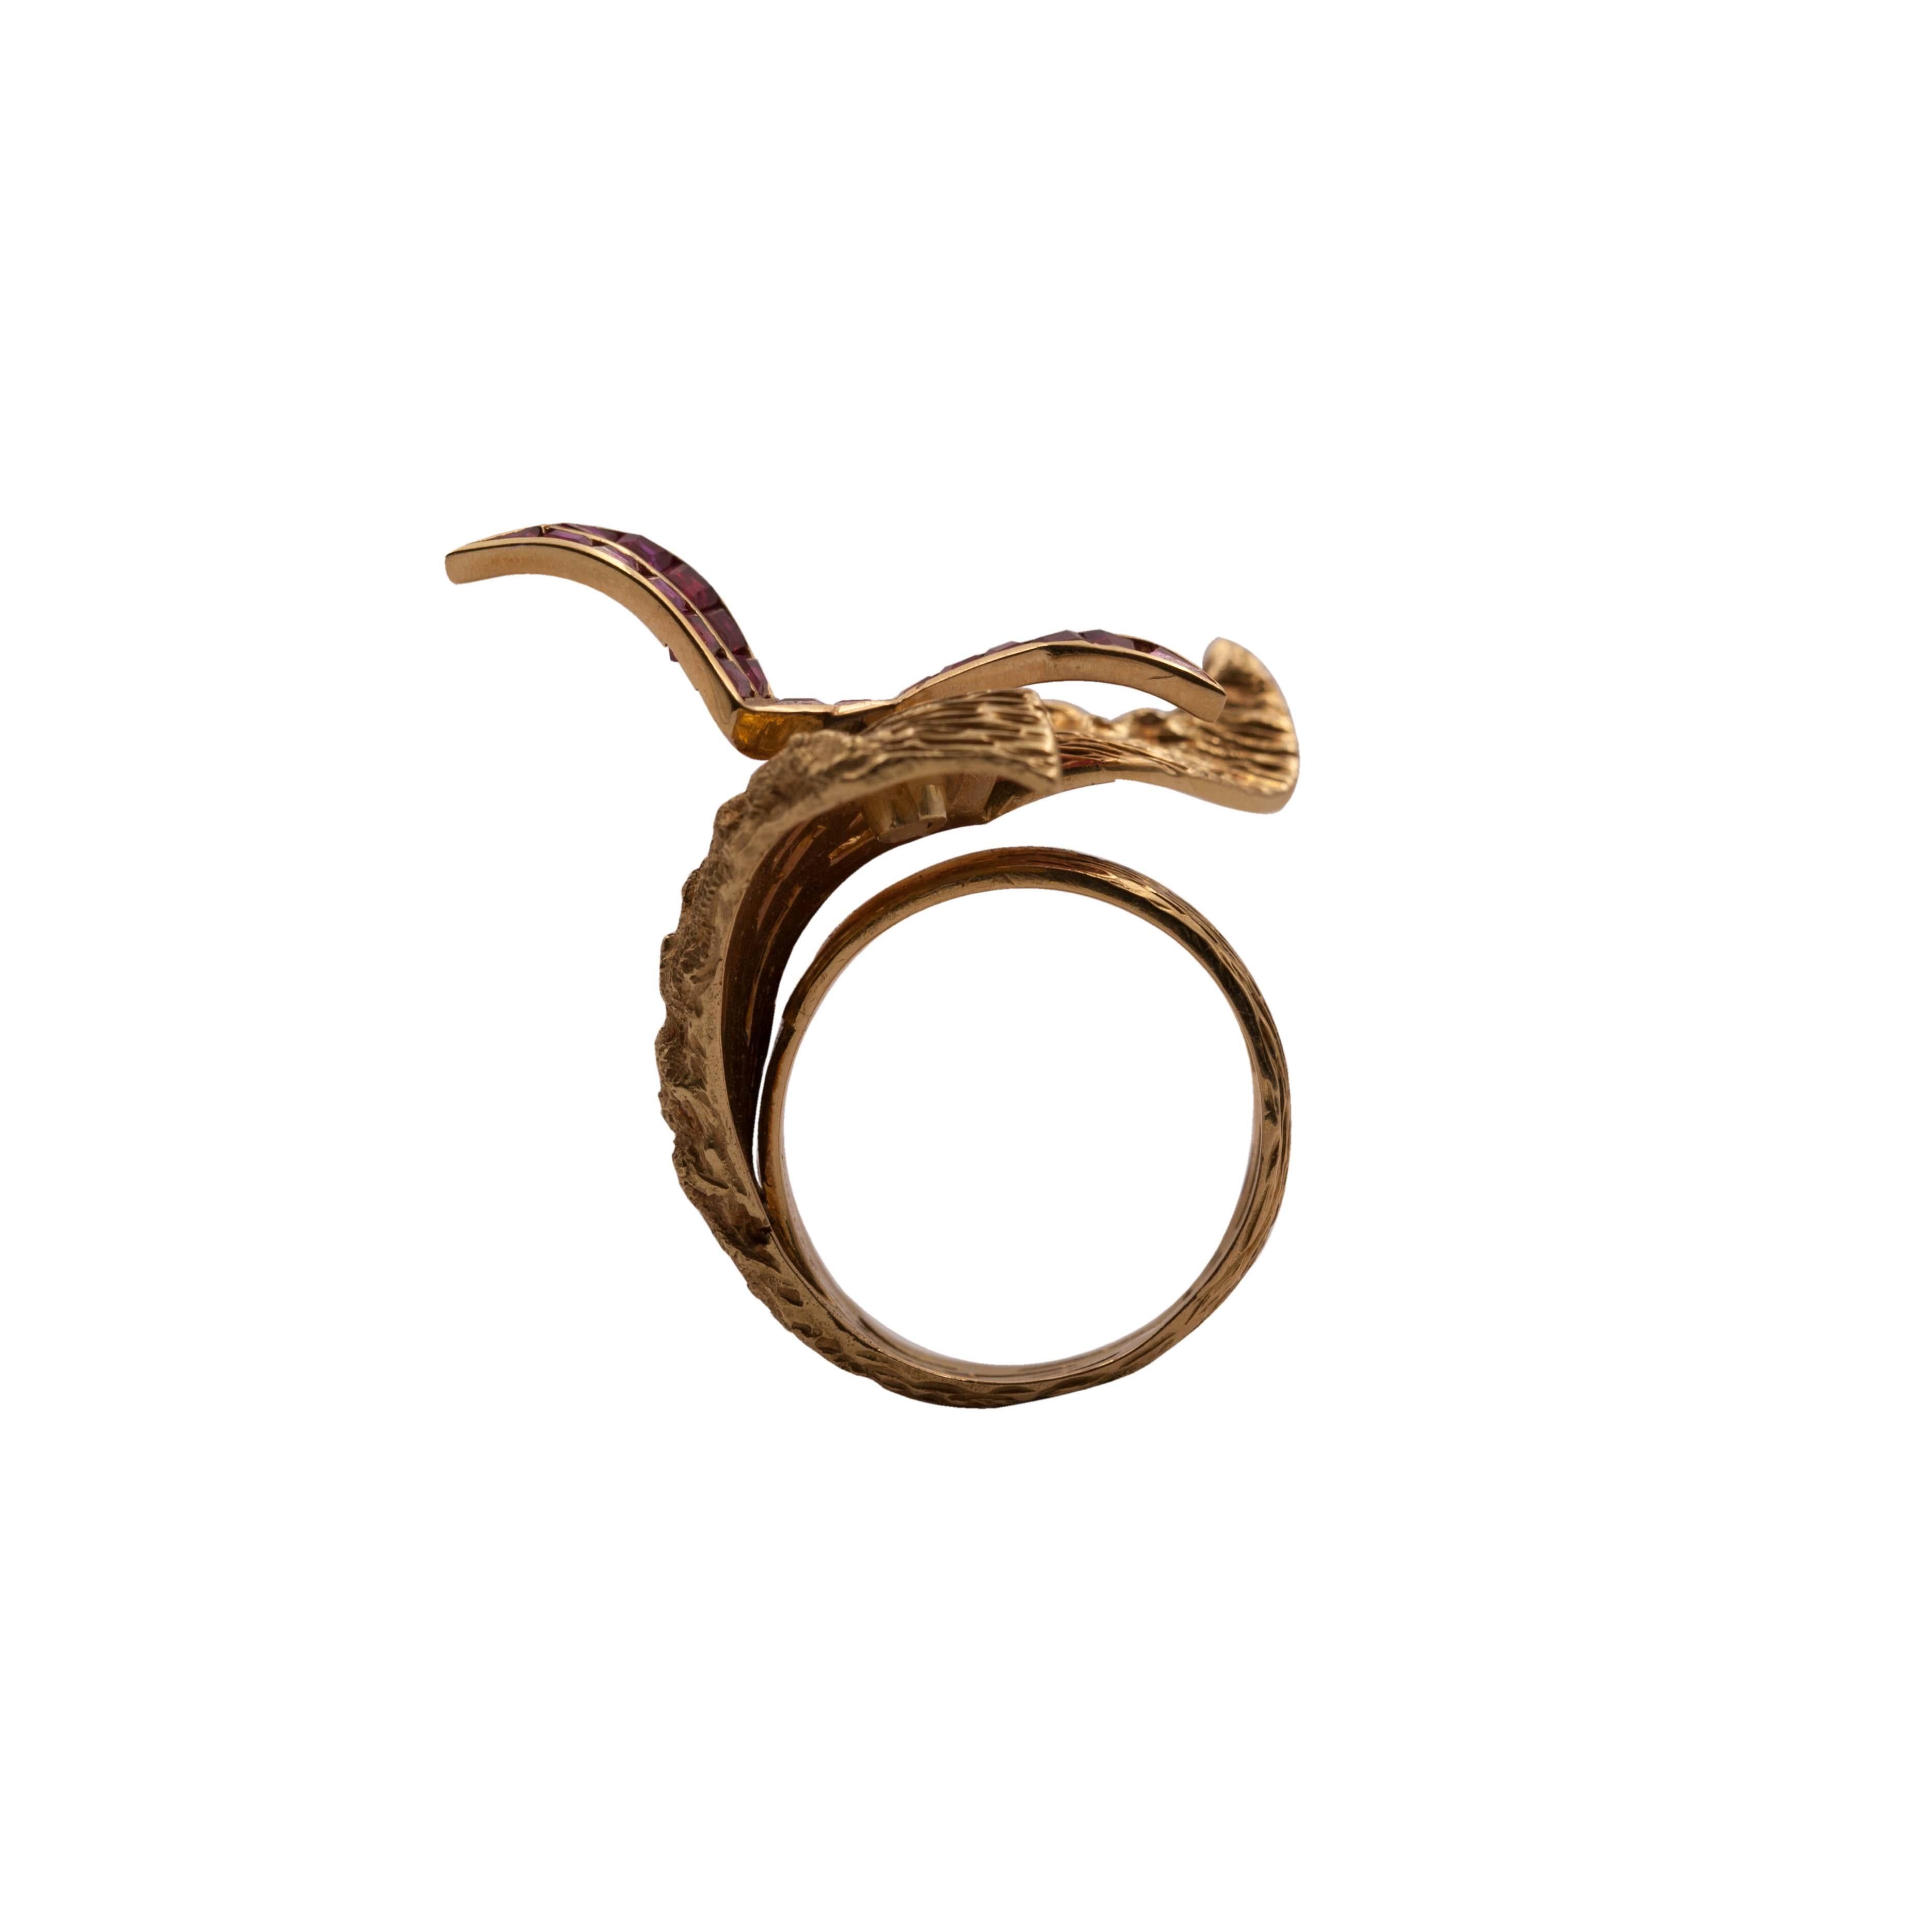 This unique ring was designed by Georges Braque and made by Heger de Löwenfeld in Paris, France, in the 1960's. The two artists had a longstanding relationship; George Braque was the designer and Heger de Löwenfeld the creator of the physical piece.